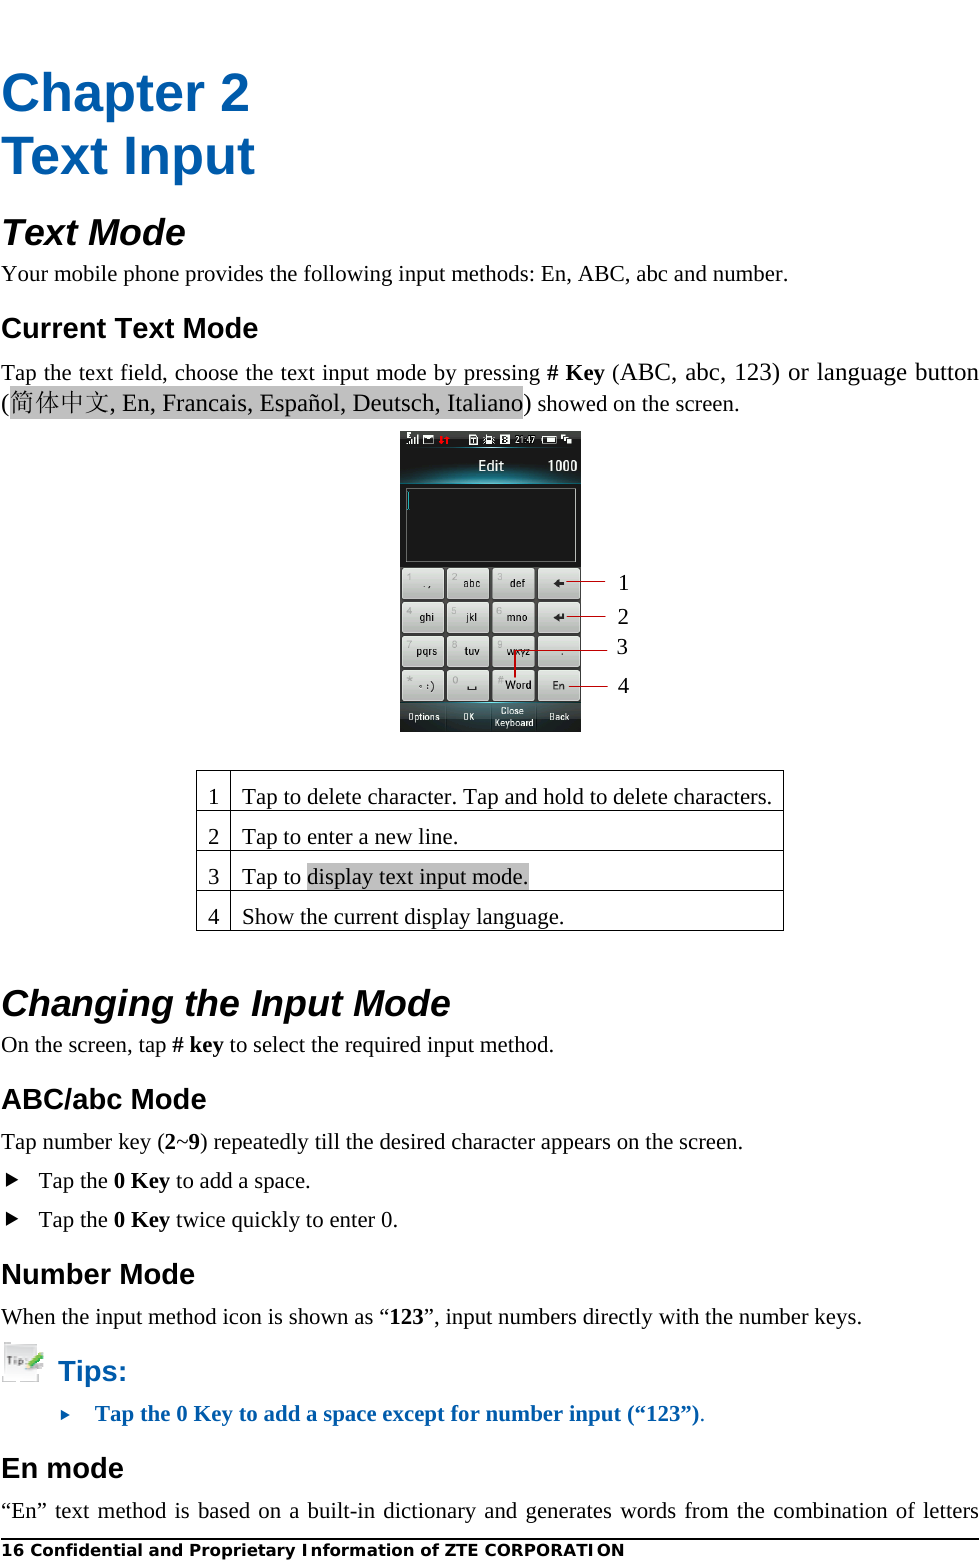  Chapter 2 Text Input Text Mode Your mobile phone provides the following input methods: En, ABC, abc and number. Current Text Mode Tap the text field, choose the text input mode by pressing # Key (ABC, abc, 123) or language button (简体中文, En, Francais, Español, Deutsch, Italiano) showed on the screen.     1234 1 Tap to delete character. Tap and hold to delete characters. 2 Tap to enter a new line.   3Tap to display text input mode. 4 Show the current display language.  Changing the Input Mode On the screen, tap # key to select the required input method. ABC/abc Mode Tap number key (2~9) repeatedly till the desired character appears on the screen.    Tap the 0 Key to add a space.  Tap the 0 Key twice quickly to enter 0. Number Mode When the input method icon is shown as “123”, input numbers directly with the number keys.  Tips:  Tap the 0 Key to add a space except for number input (“123”). En mode “En” text method is based on a built-in dictionary and generates words from the combination of letters 16 Confidential and Proprietary Information of ZTE CORPORATION